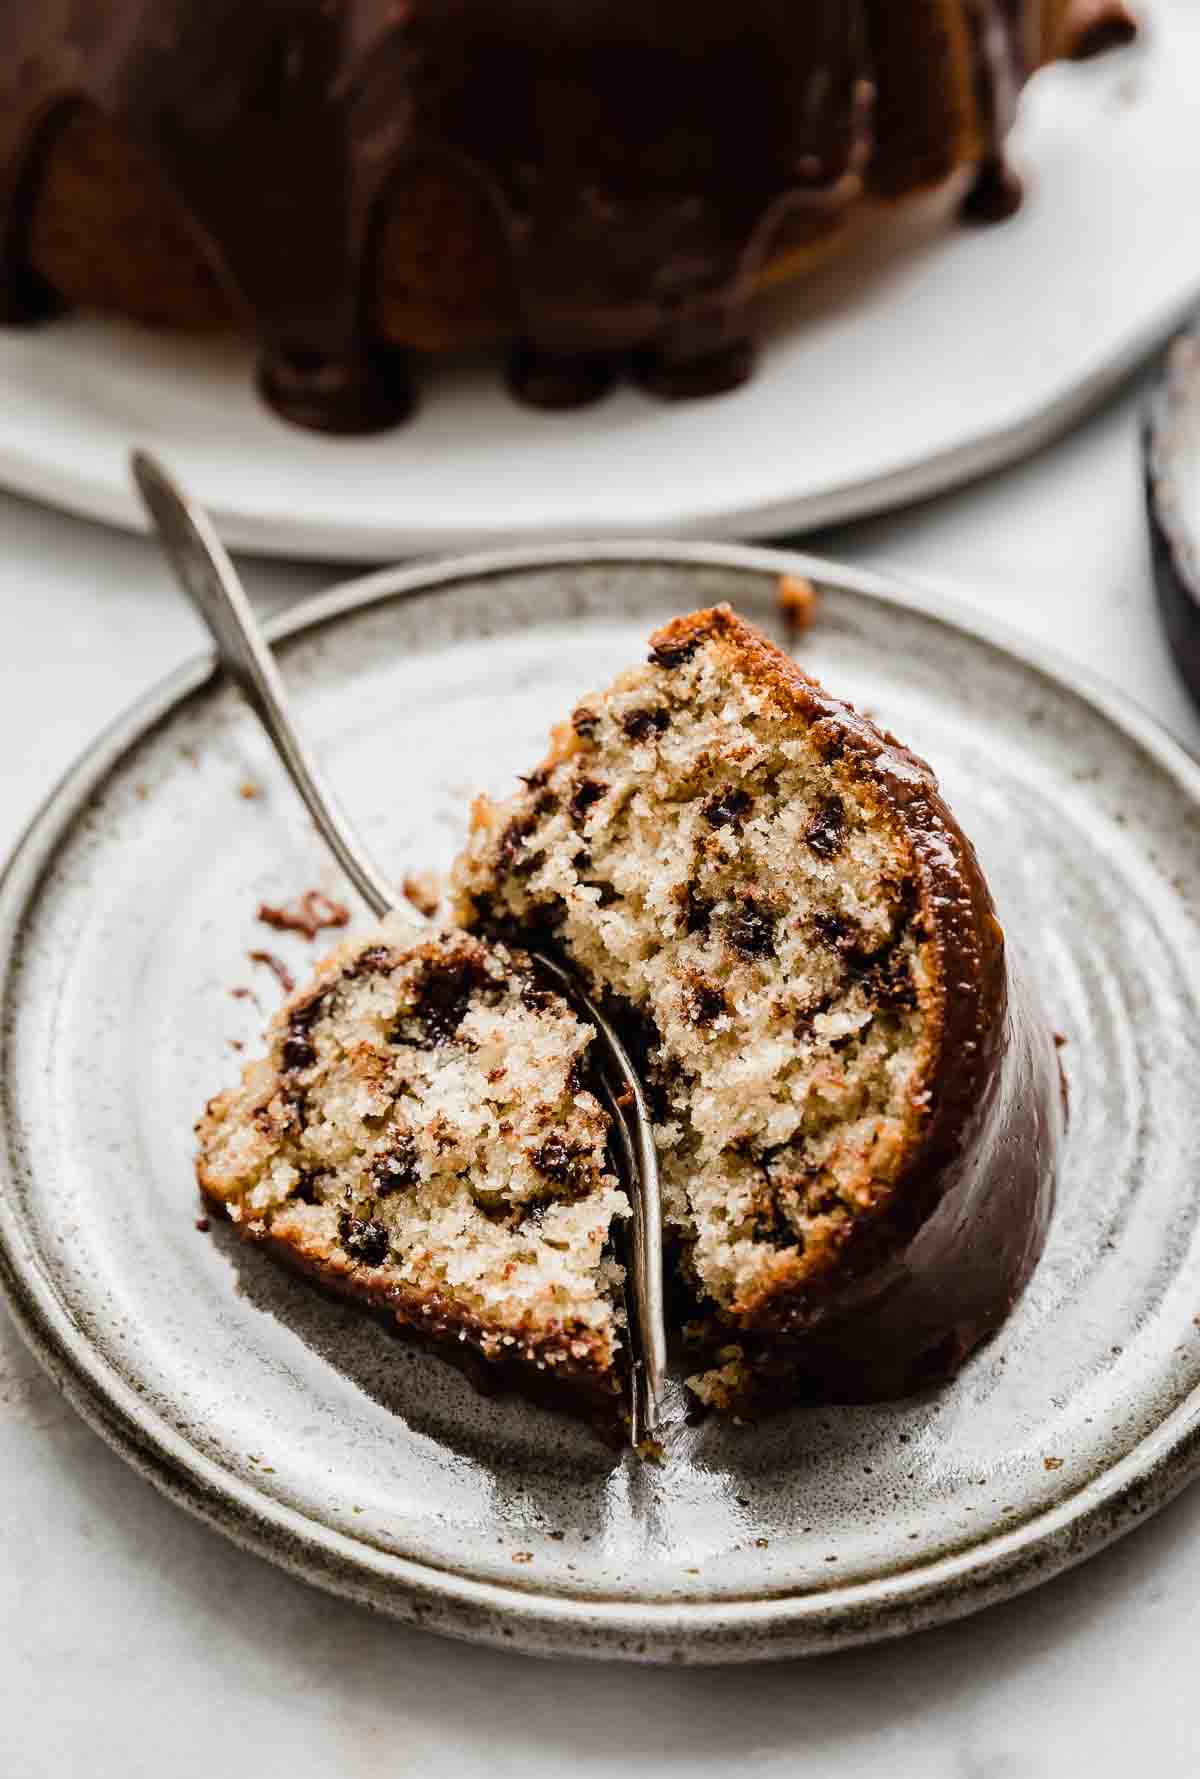 A slice of Chocolate Chip Bundt Cake on a gray plate with a fork cutting into the cake.